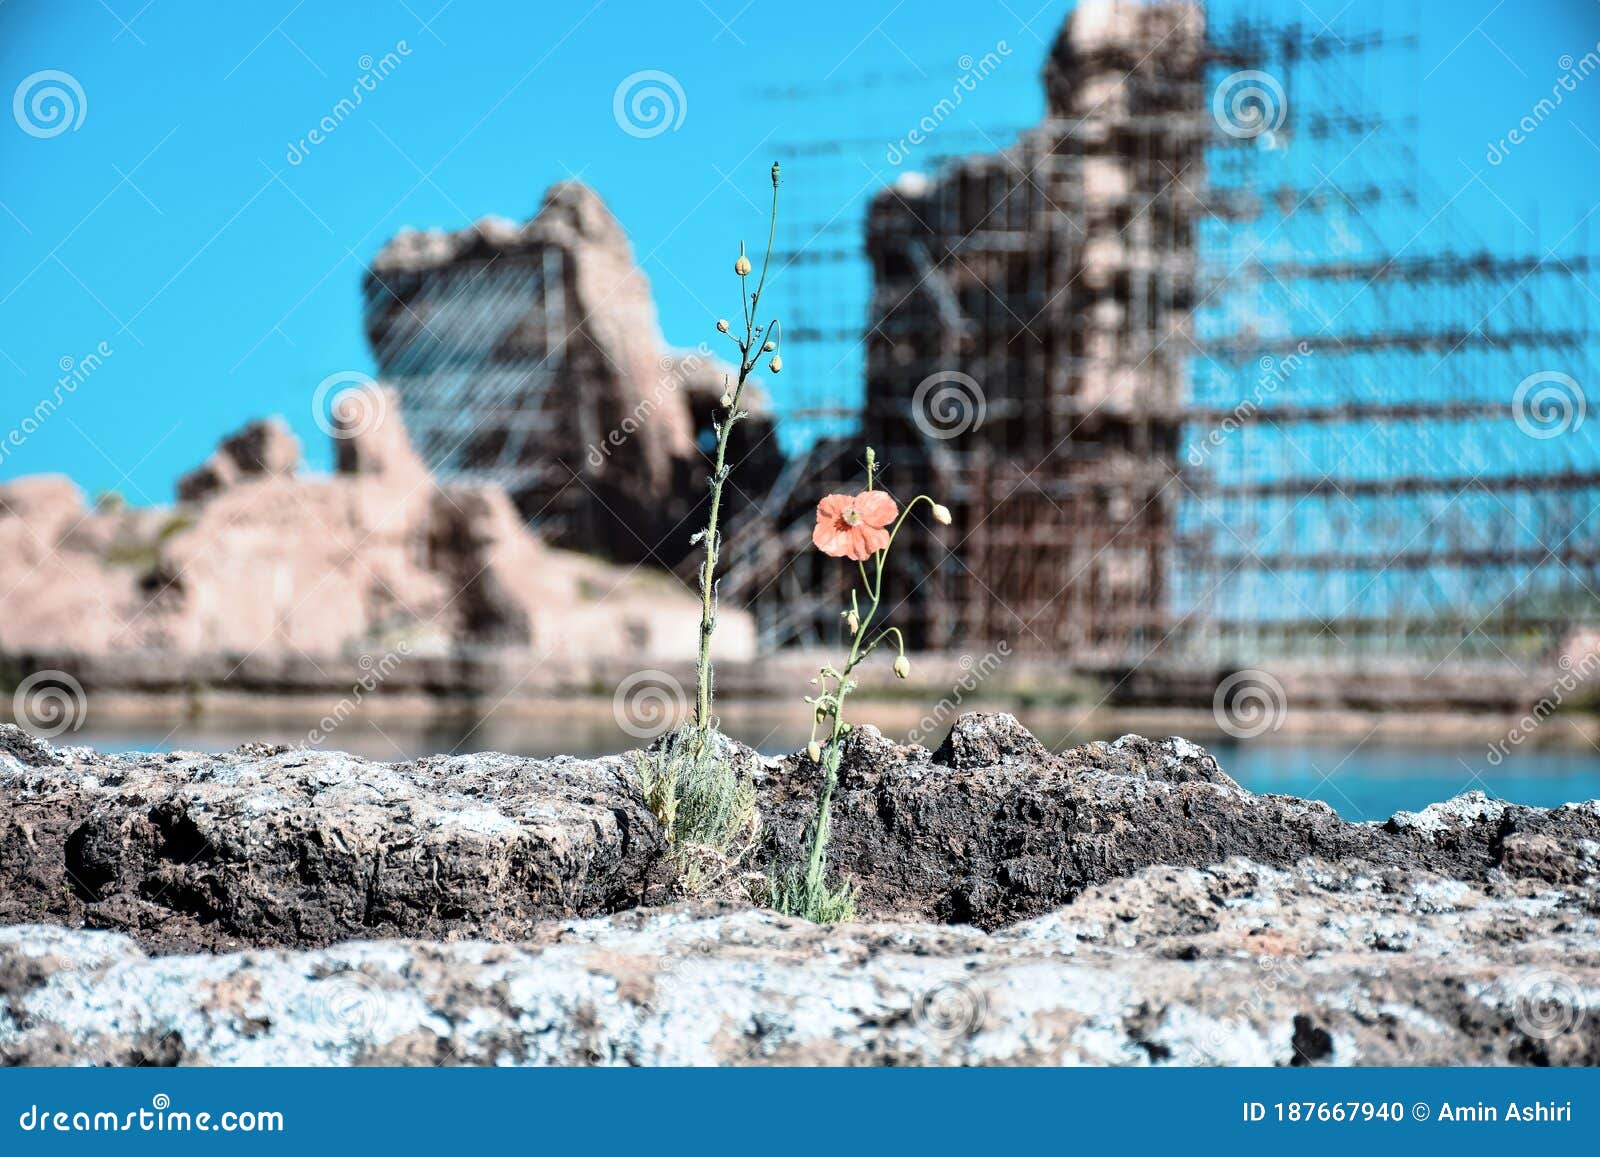 poppy on the shores of the takhte soleyman lake with a great background of takhte soleyman an amazing iranian archaeological site.